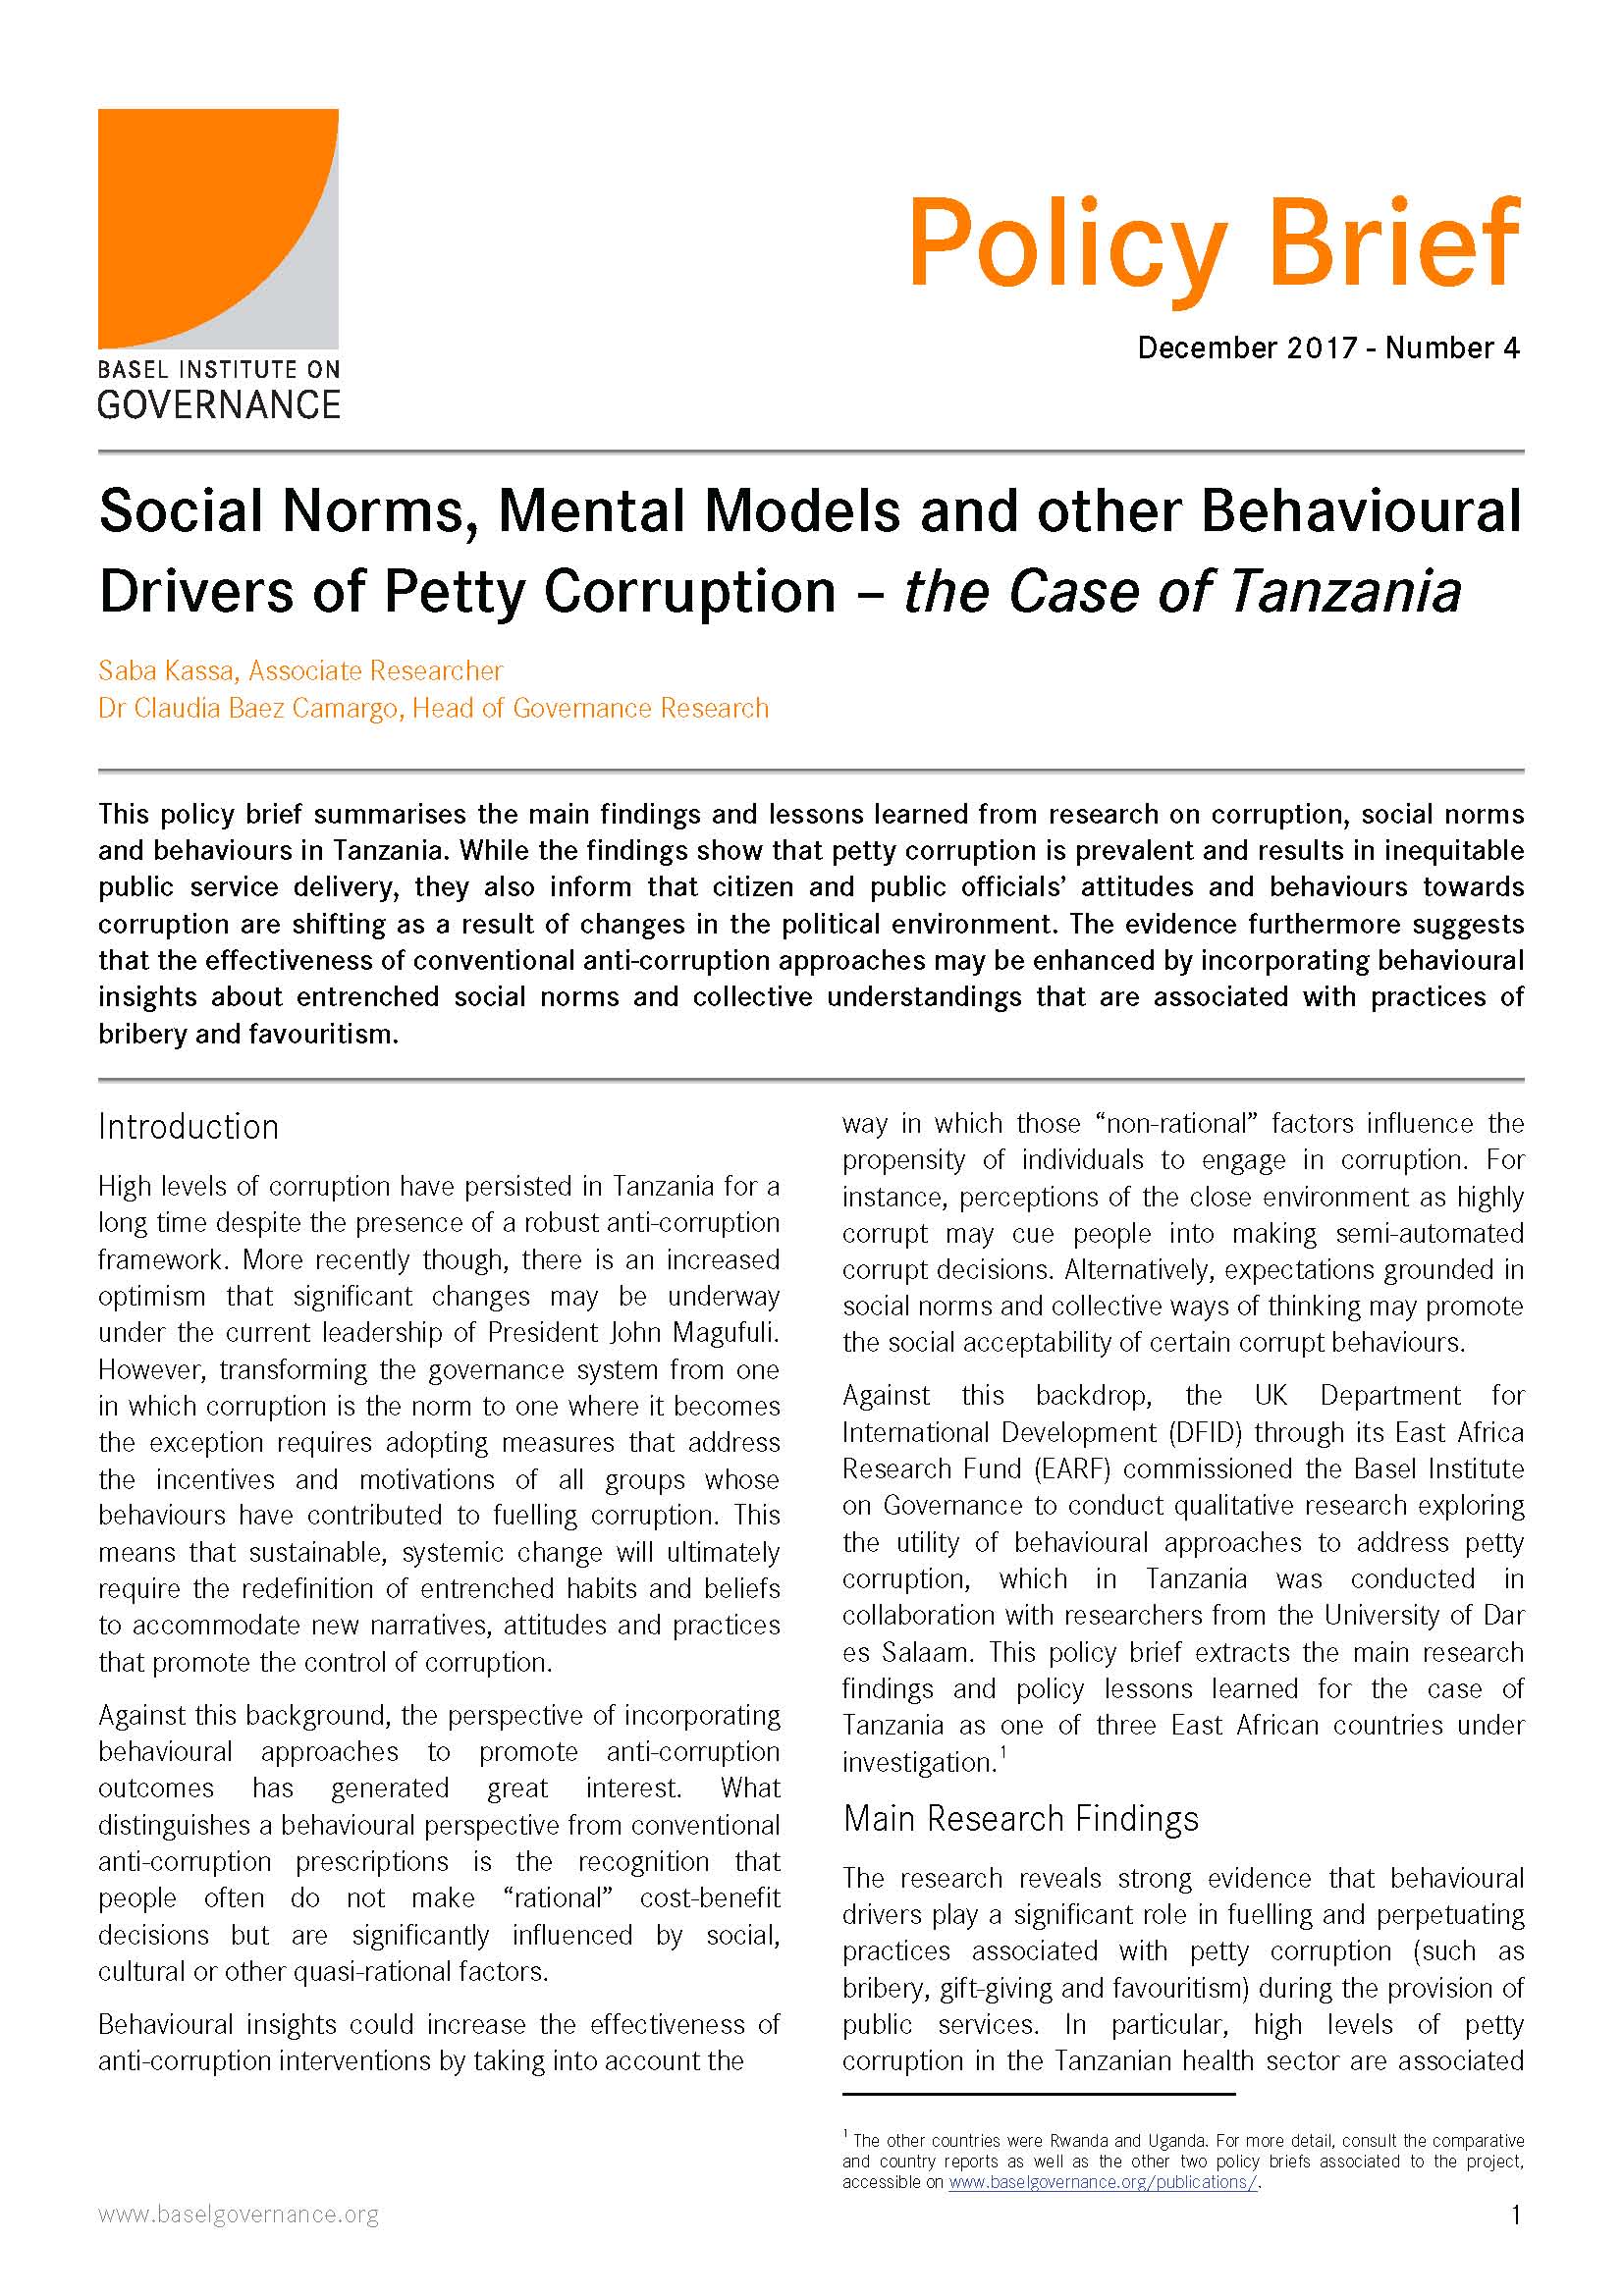 First page of Tanzania policy brief